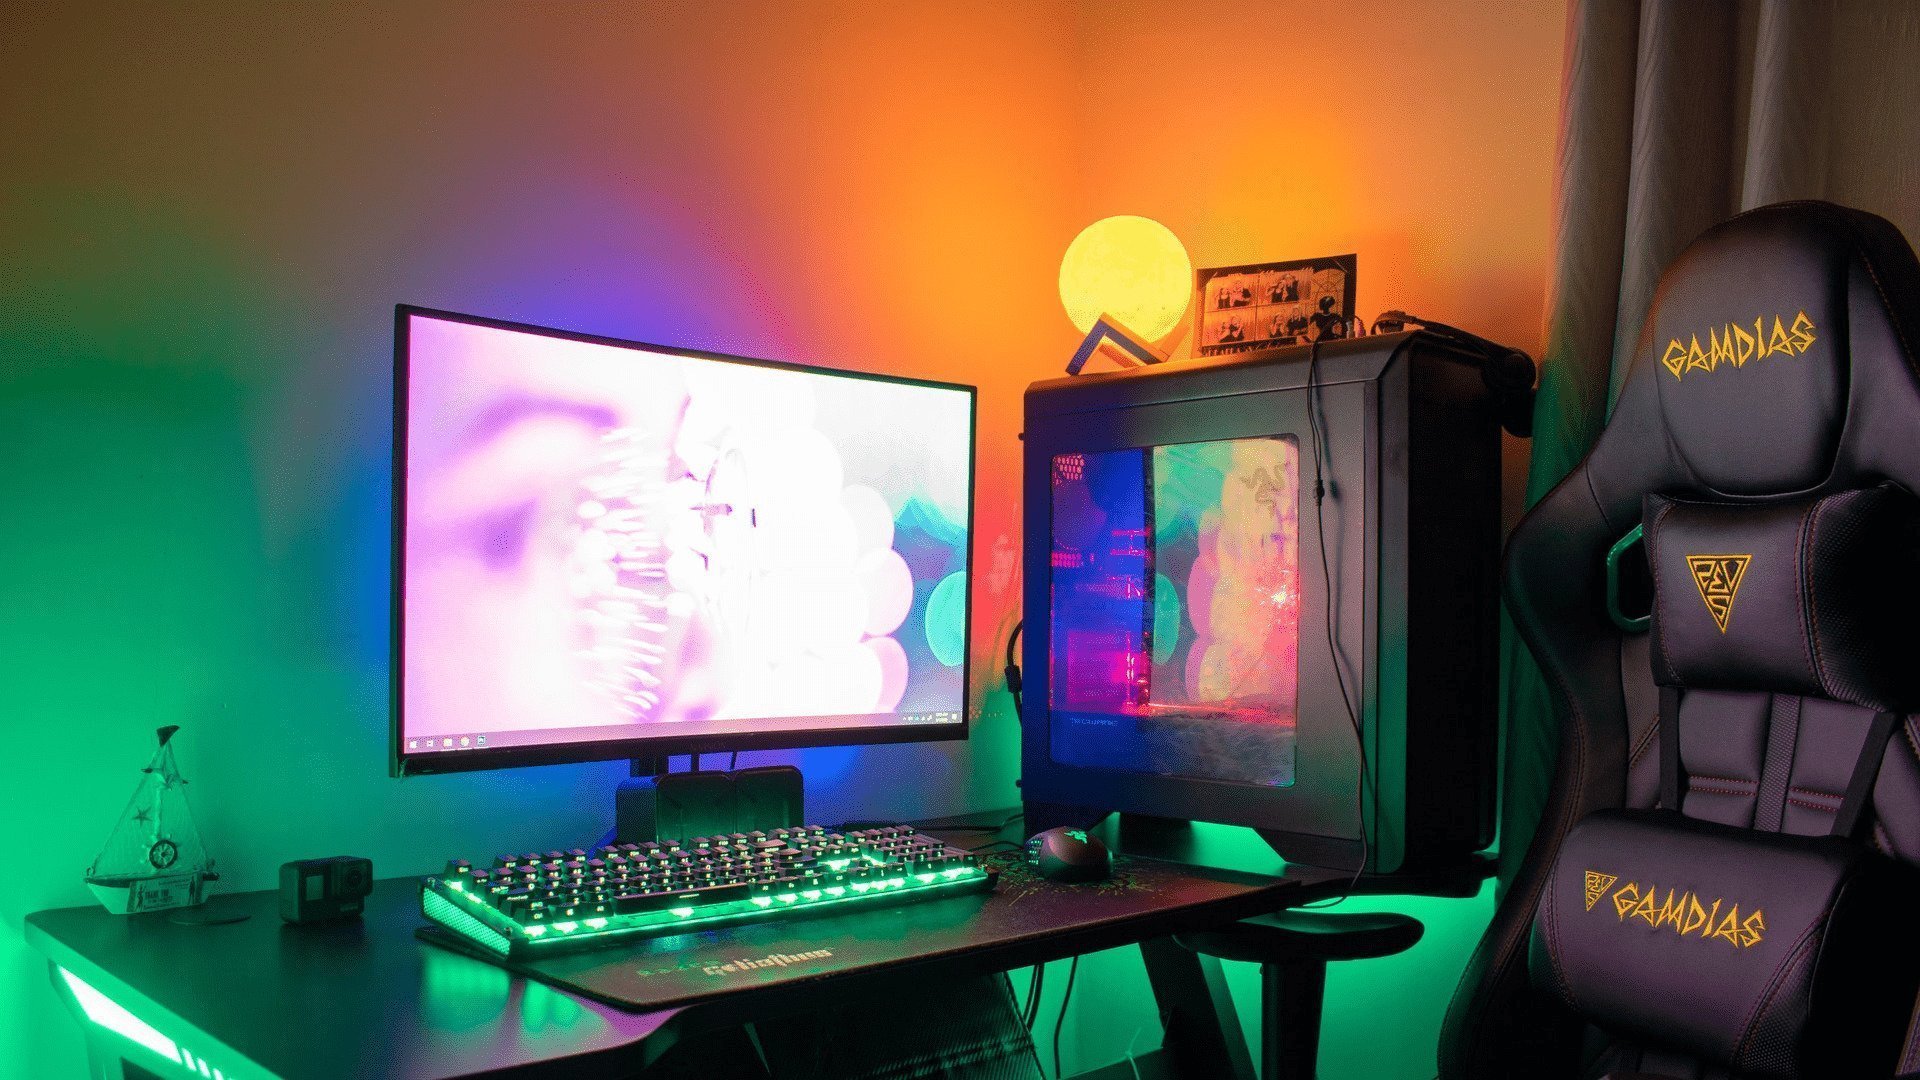 Gaming PC / Photo by John Petalcurin from Pexels